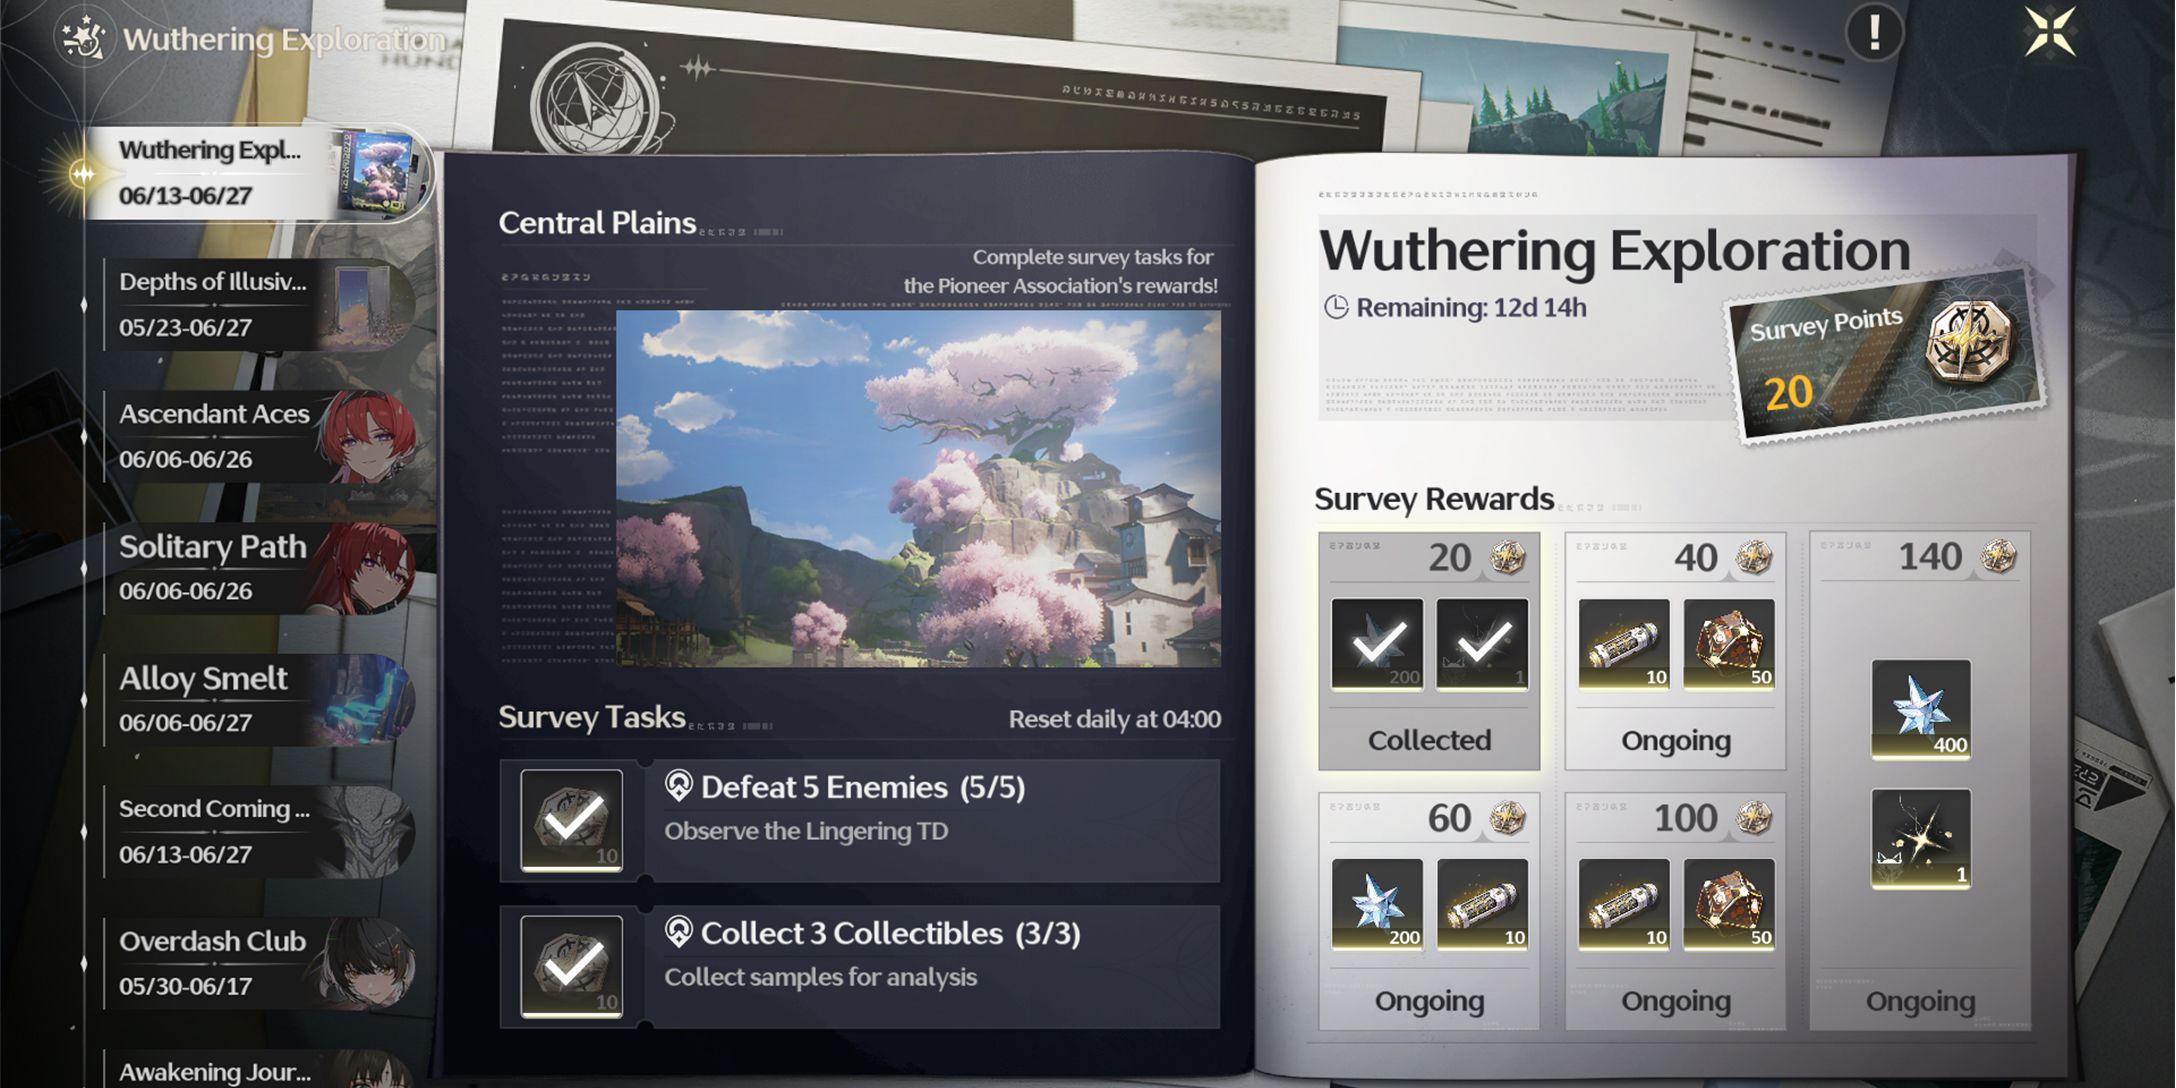 wuwa wuthering exploration event survey task central plains